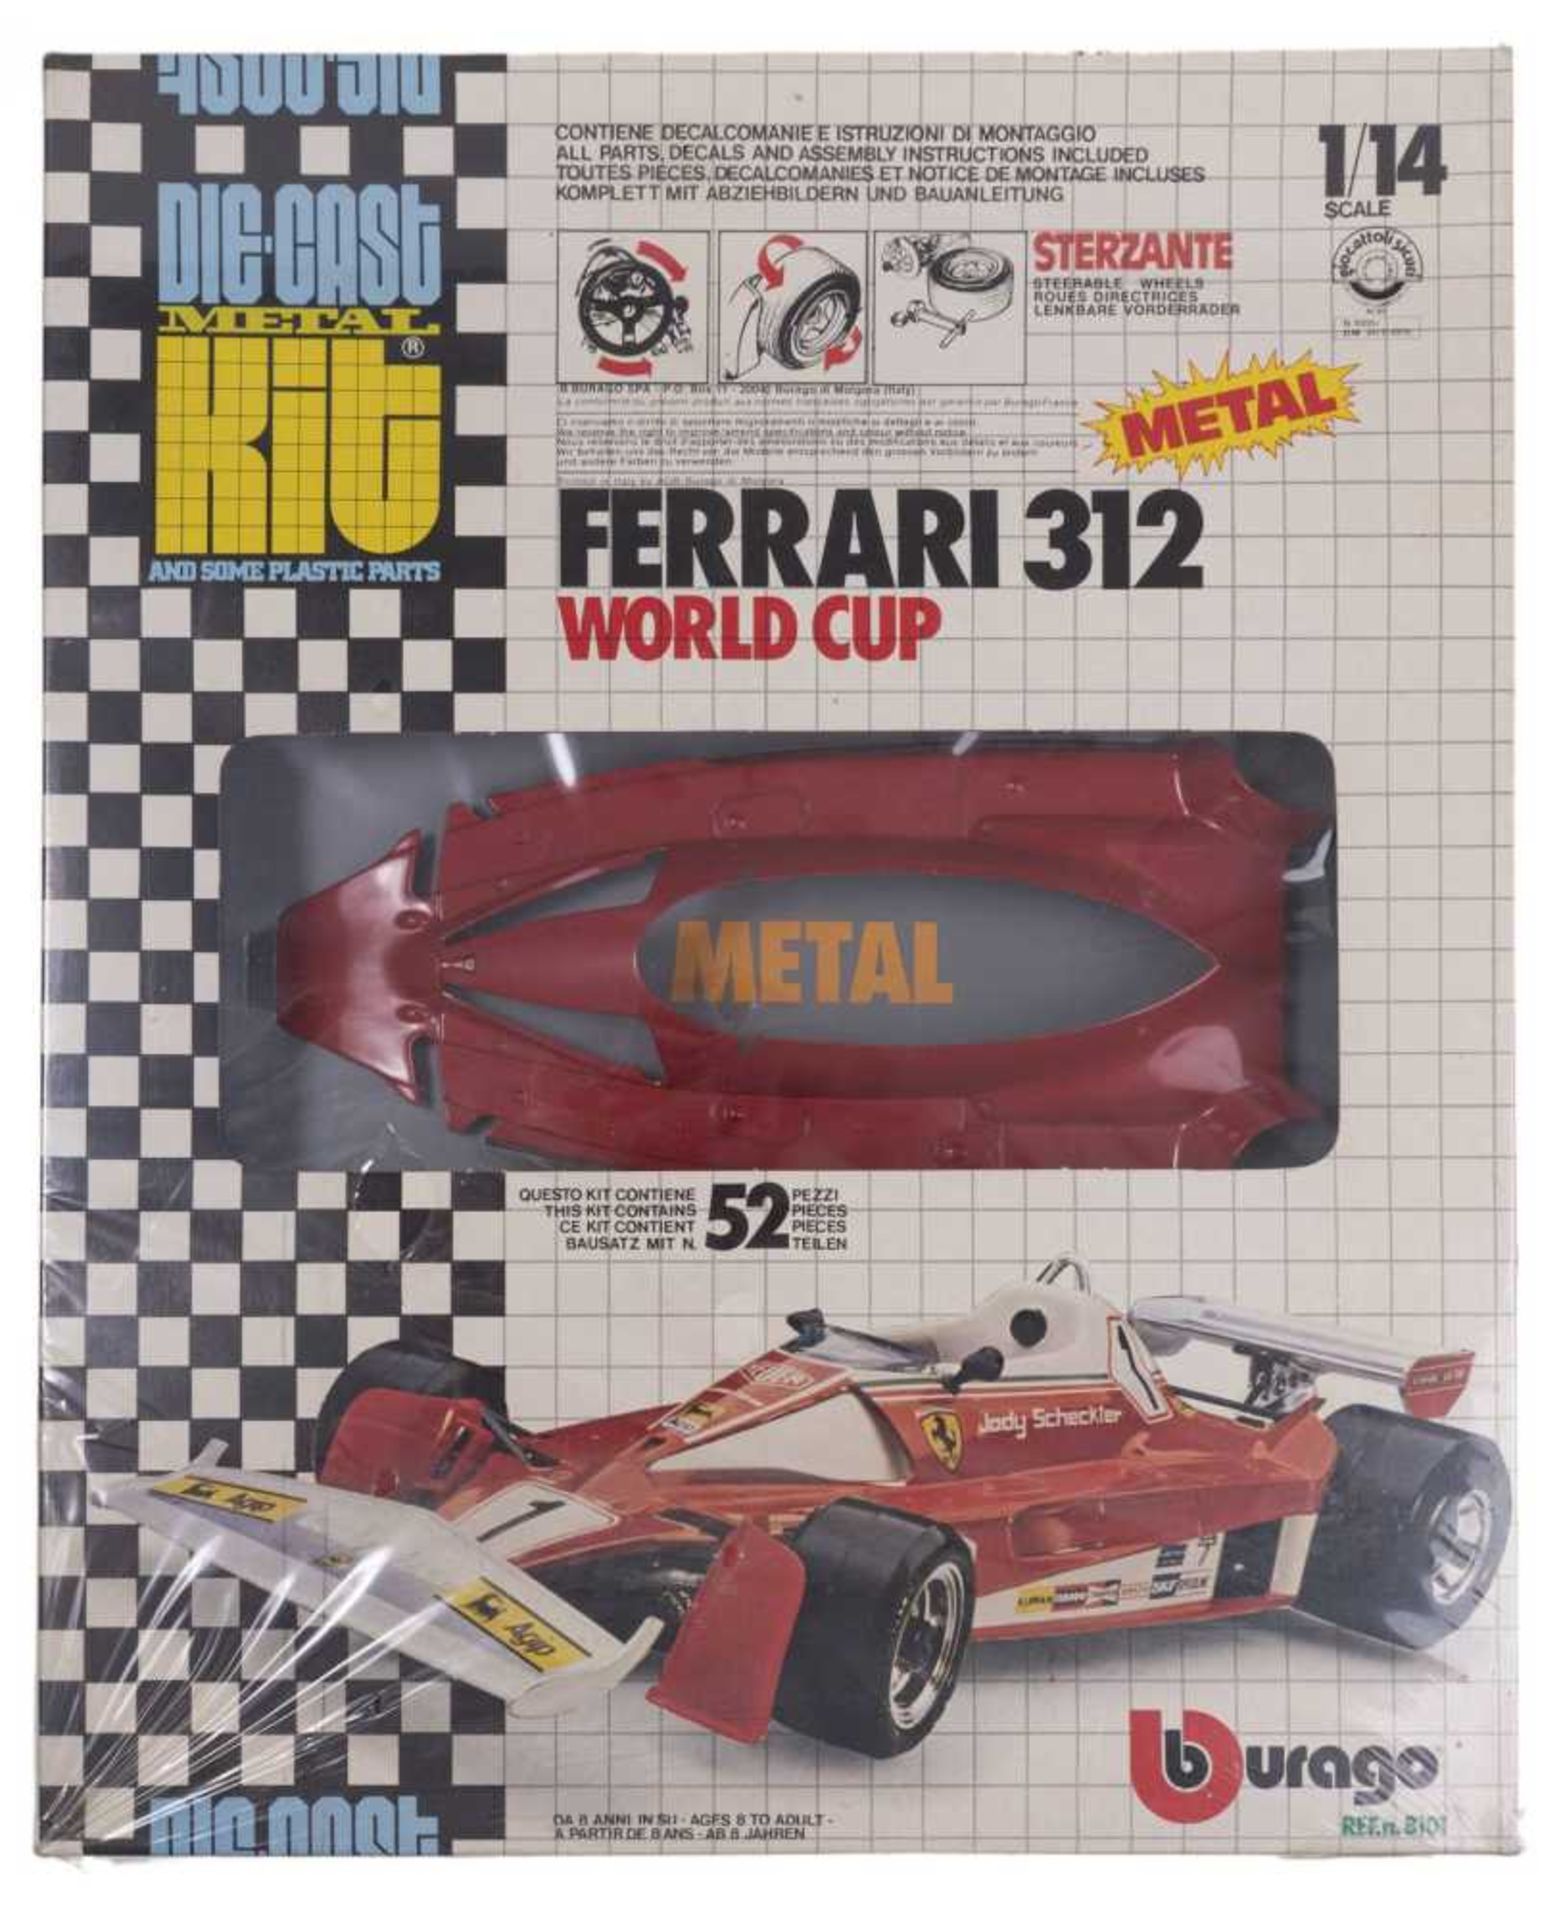 FERRARI 312 WORLD CUP (Jody Scheckter) as unopened assembly in old the Cast original packaging (thes